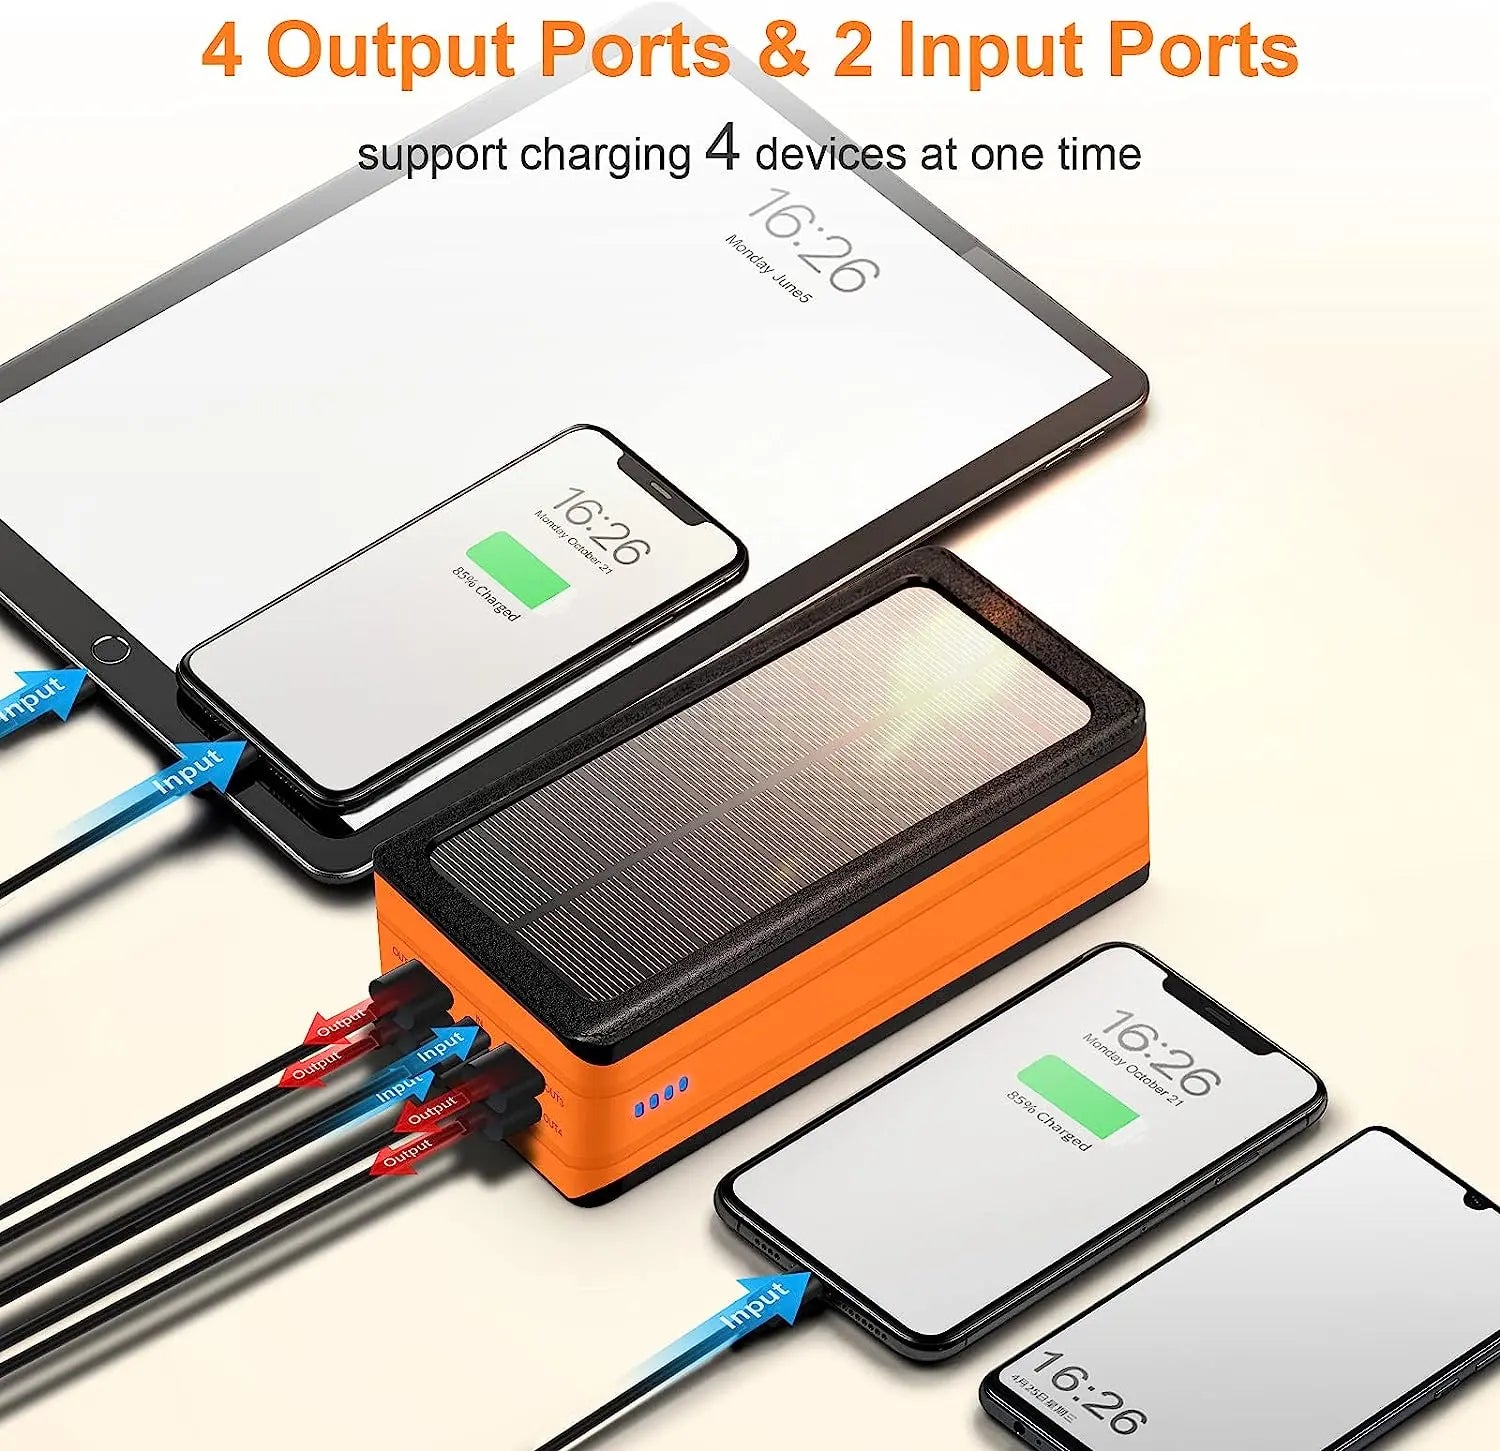 PS-10+ Solar Power Bank 100000mAh Outdoor Portable Charger with